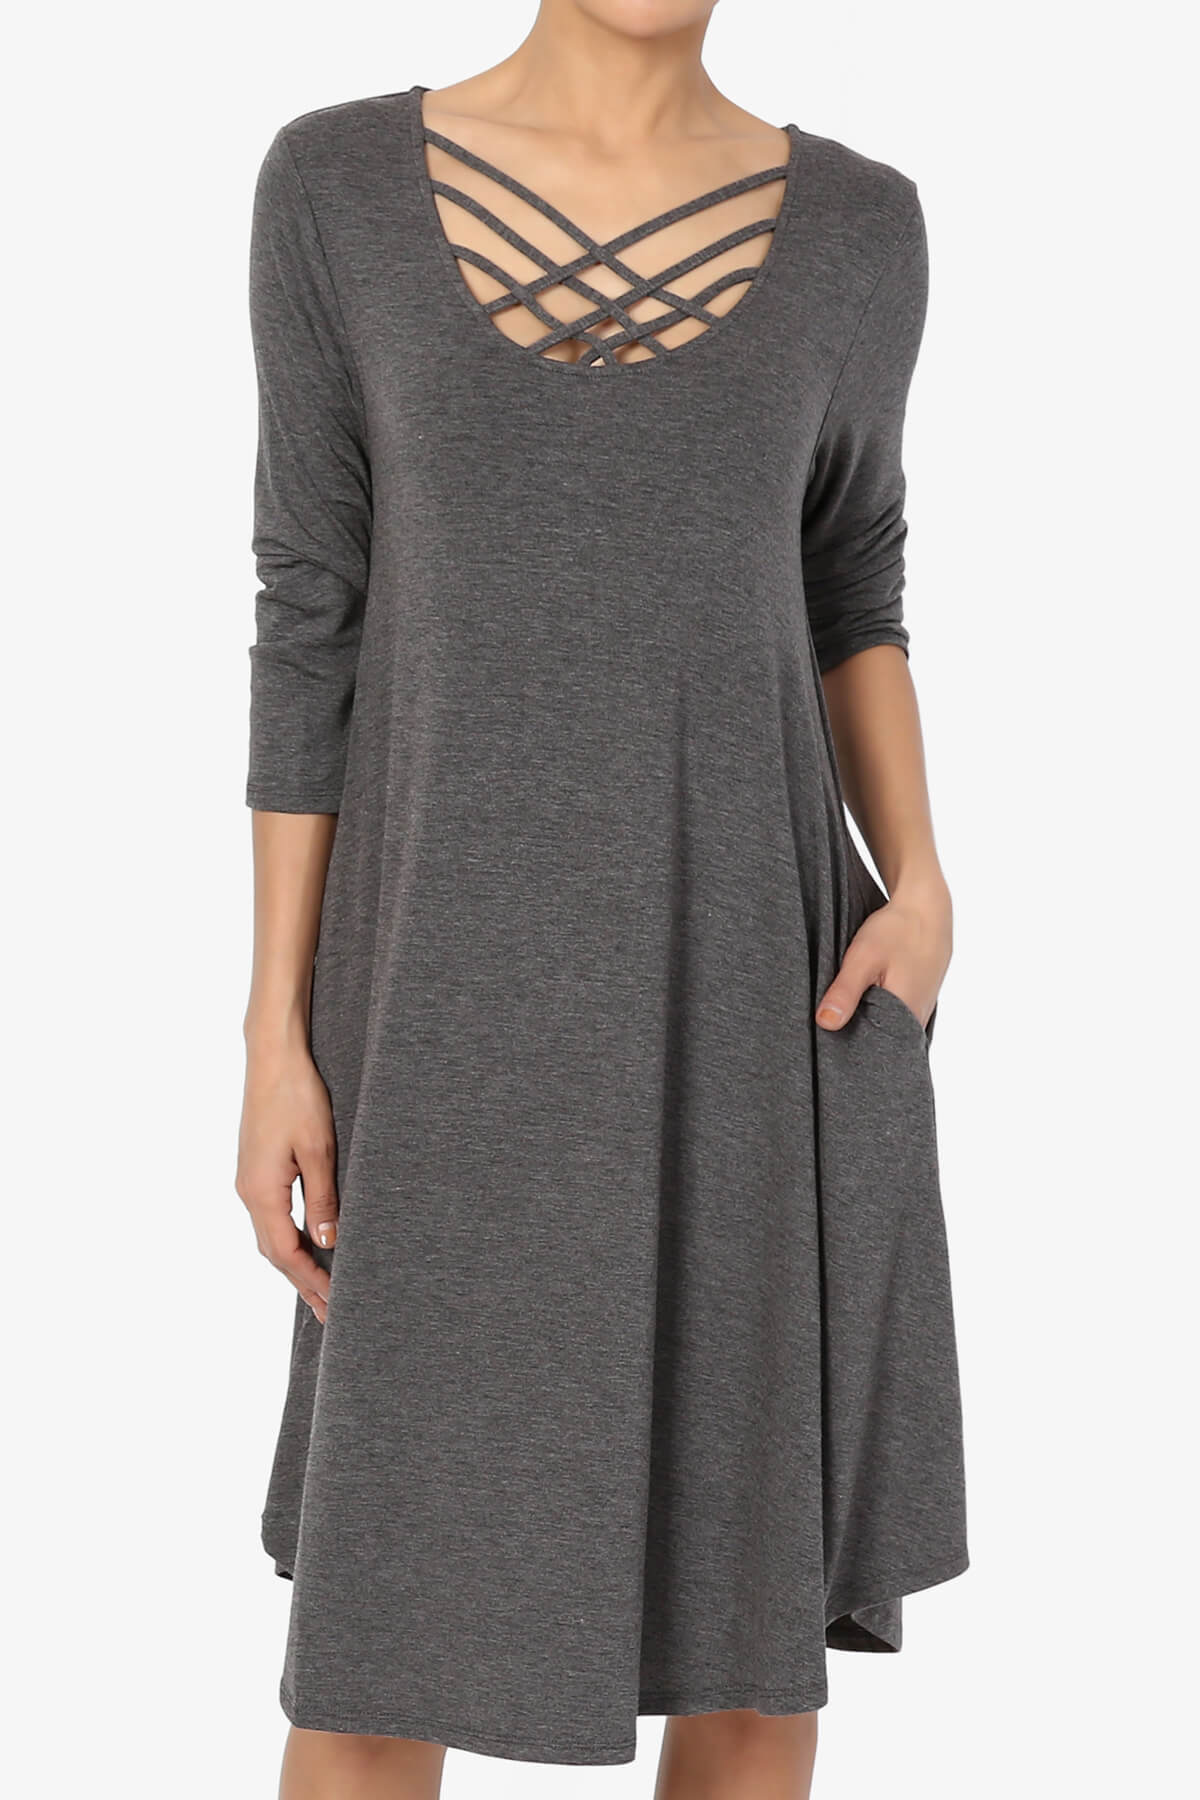 Ariella 3/4 Sleeve Strappy Scoop Neck Dress CHARCOAL_1